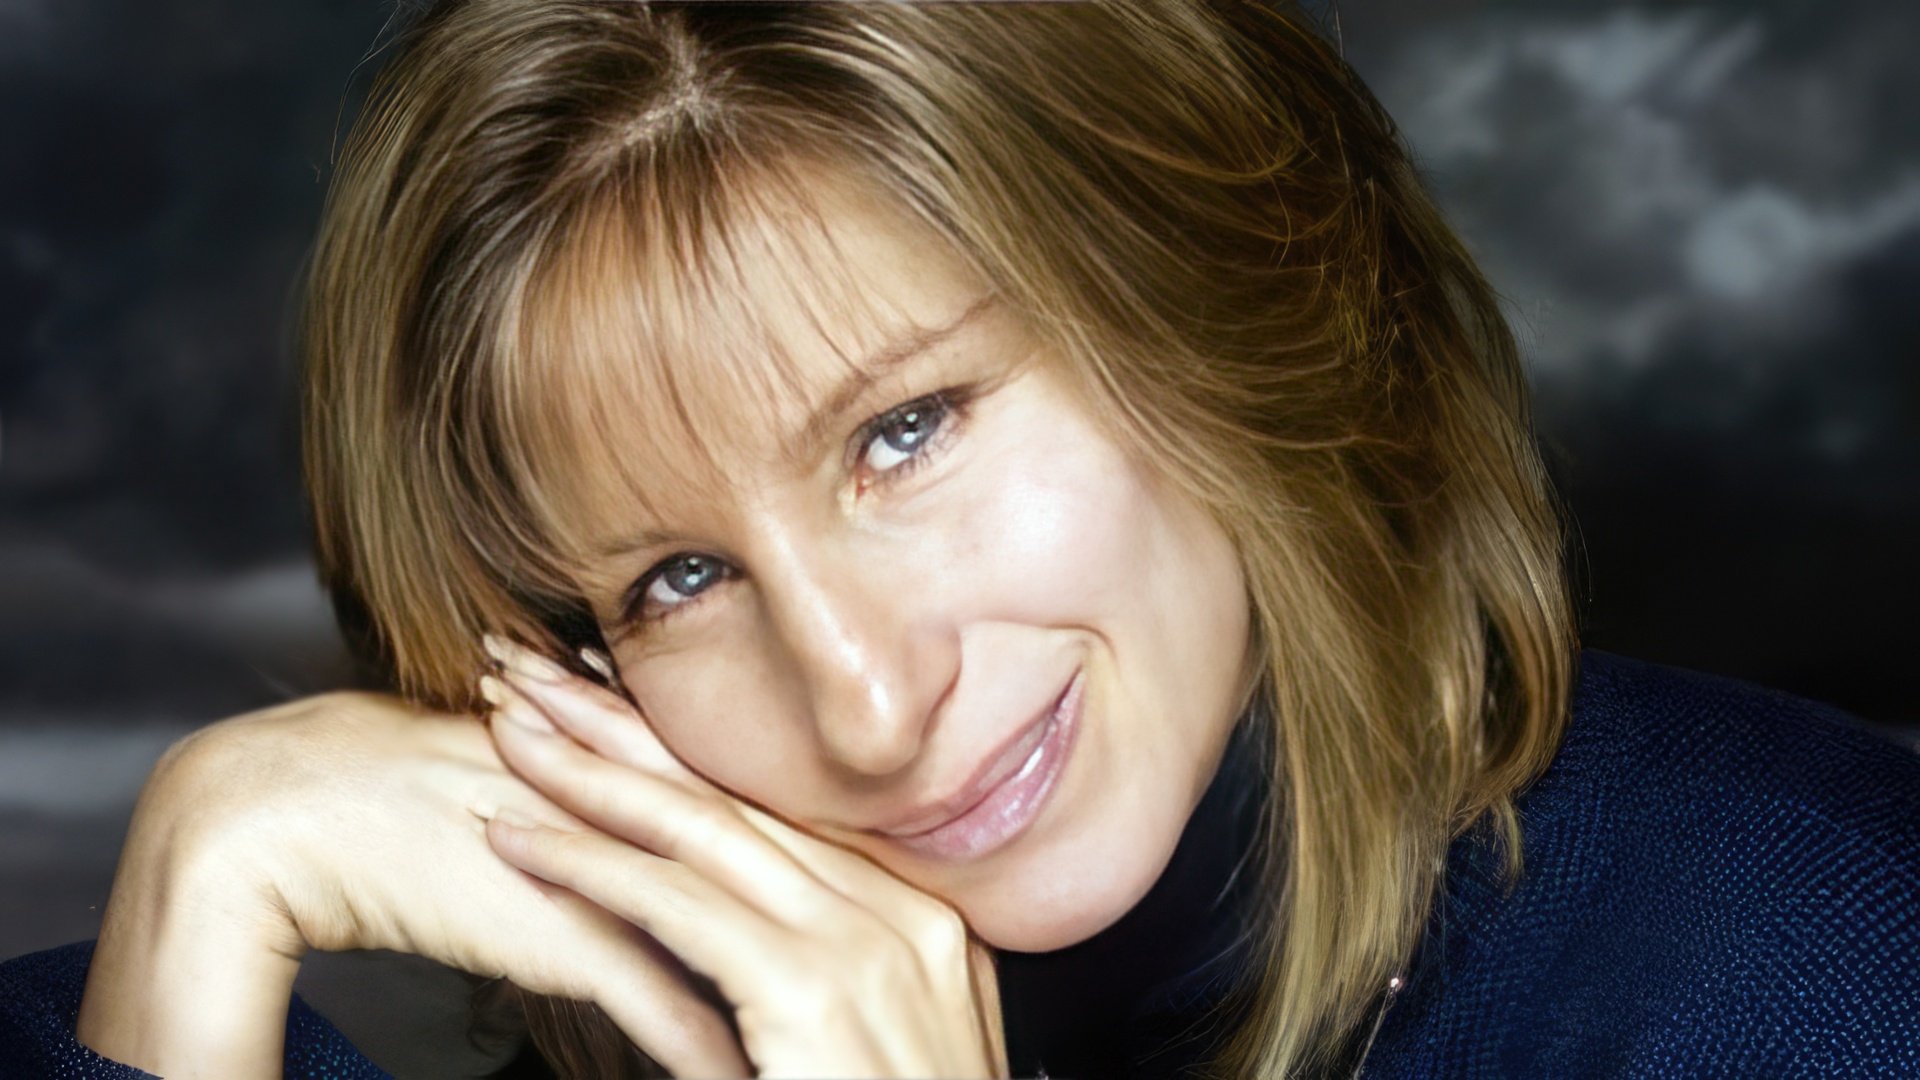 Barbra Streisand ‒ the most famous singer of the 20th century